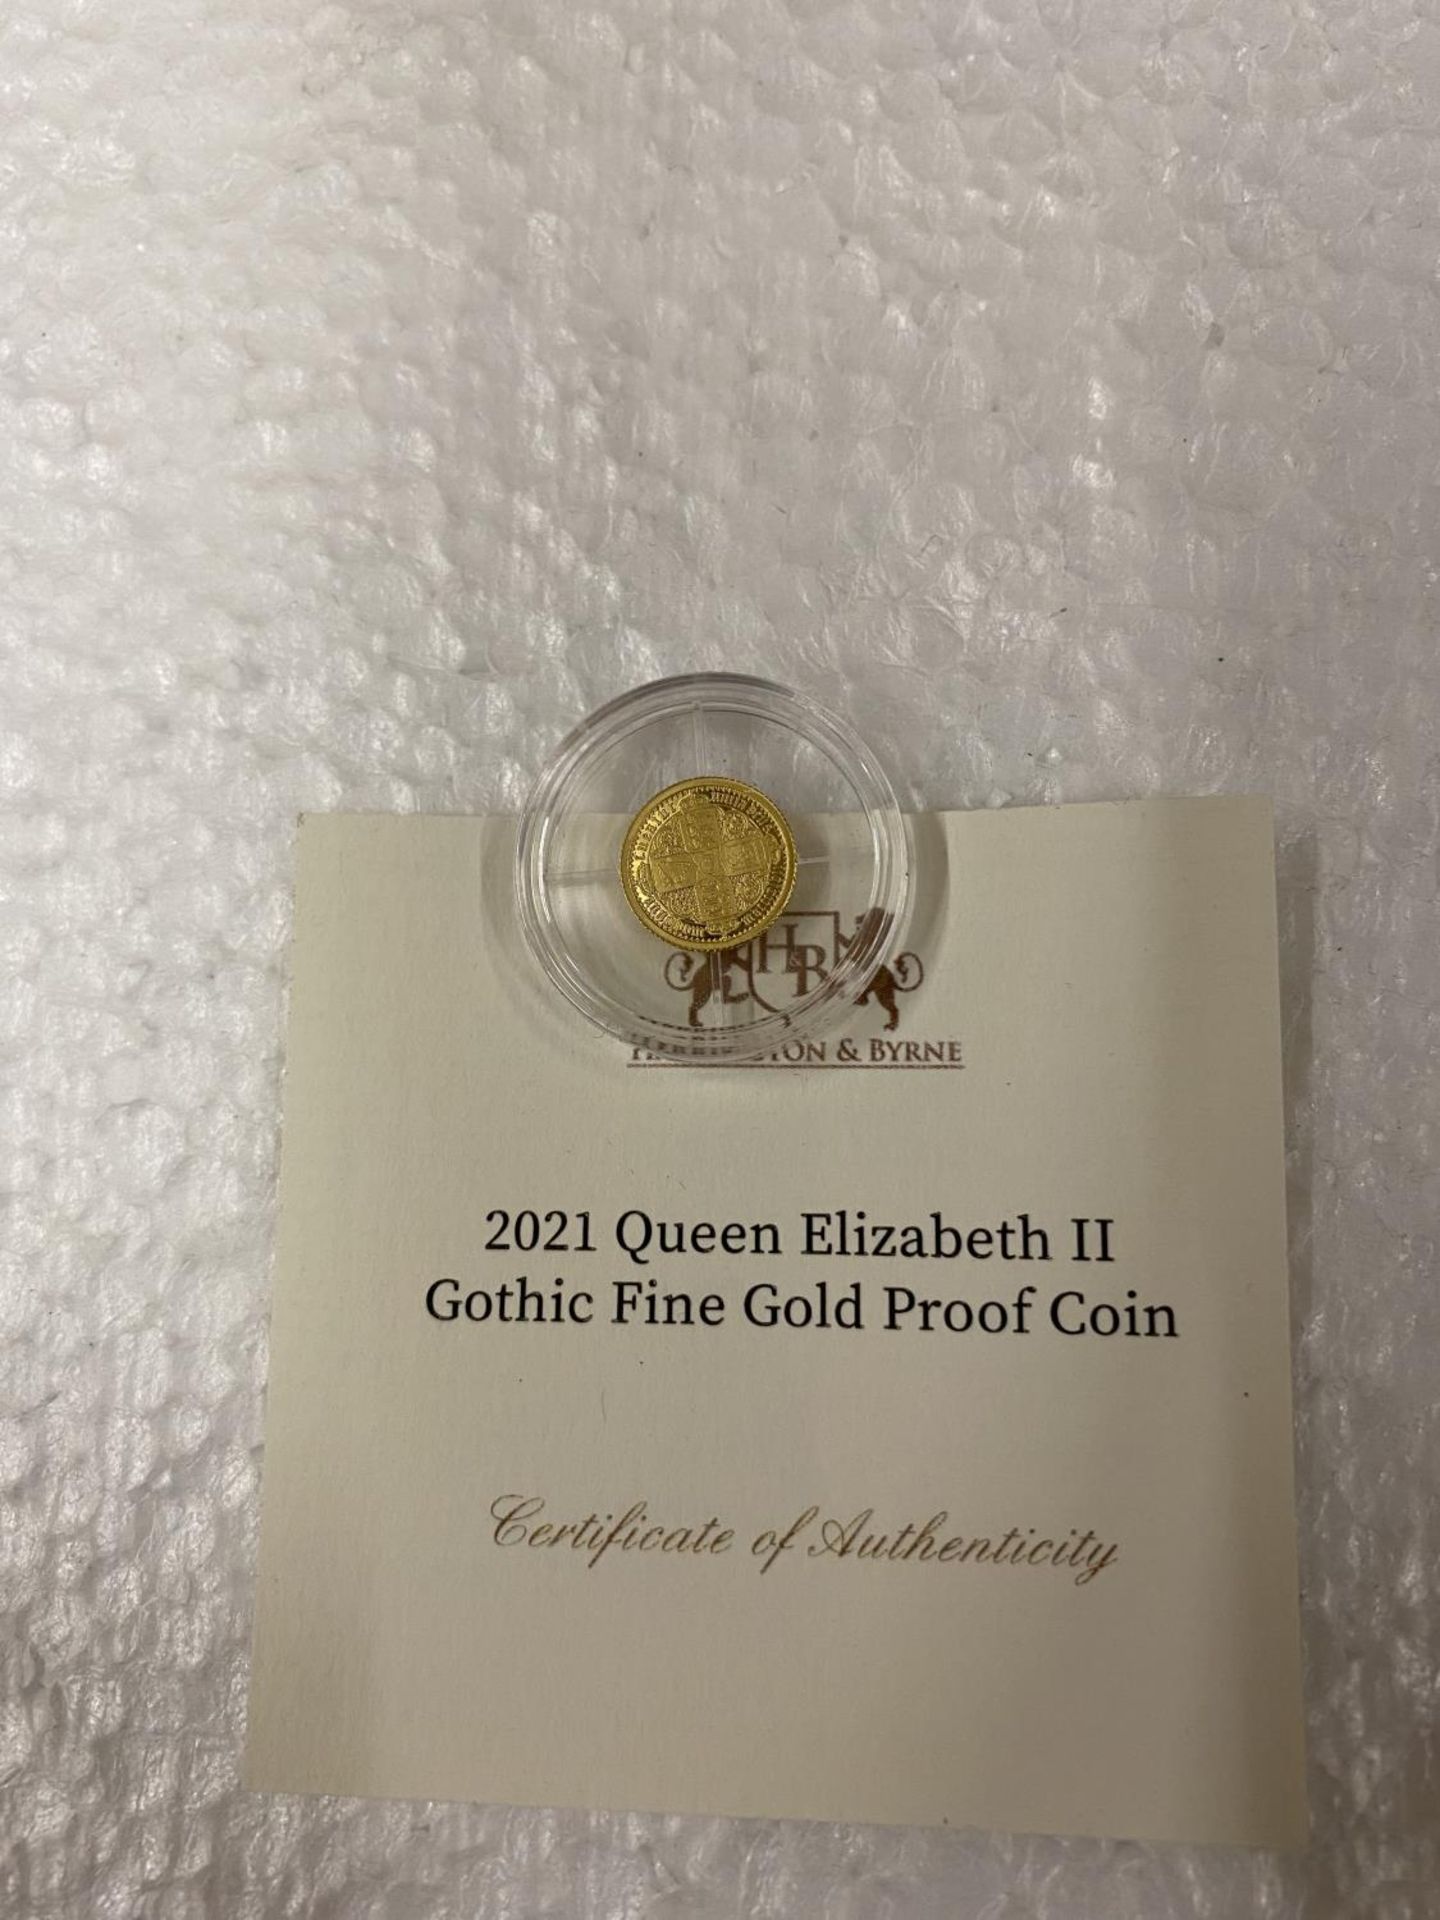 ALDERNEY , CI “2021 QE11 GOTHIC” 24 CARAT GOLD PROOF COIN WITH COA. THE COIN WEIGHS 0.5 GRAMS - Image 3 of 3